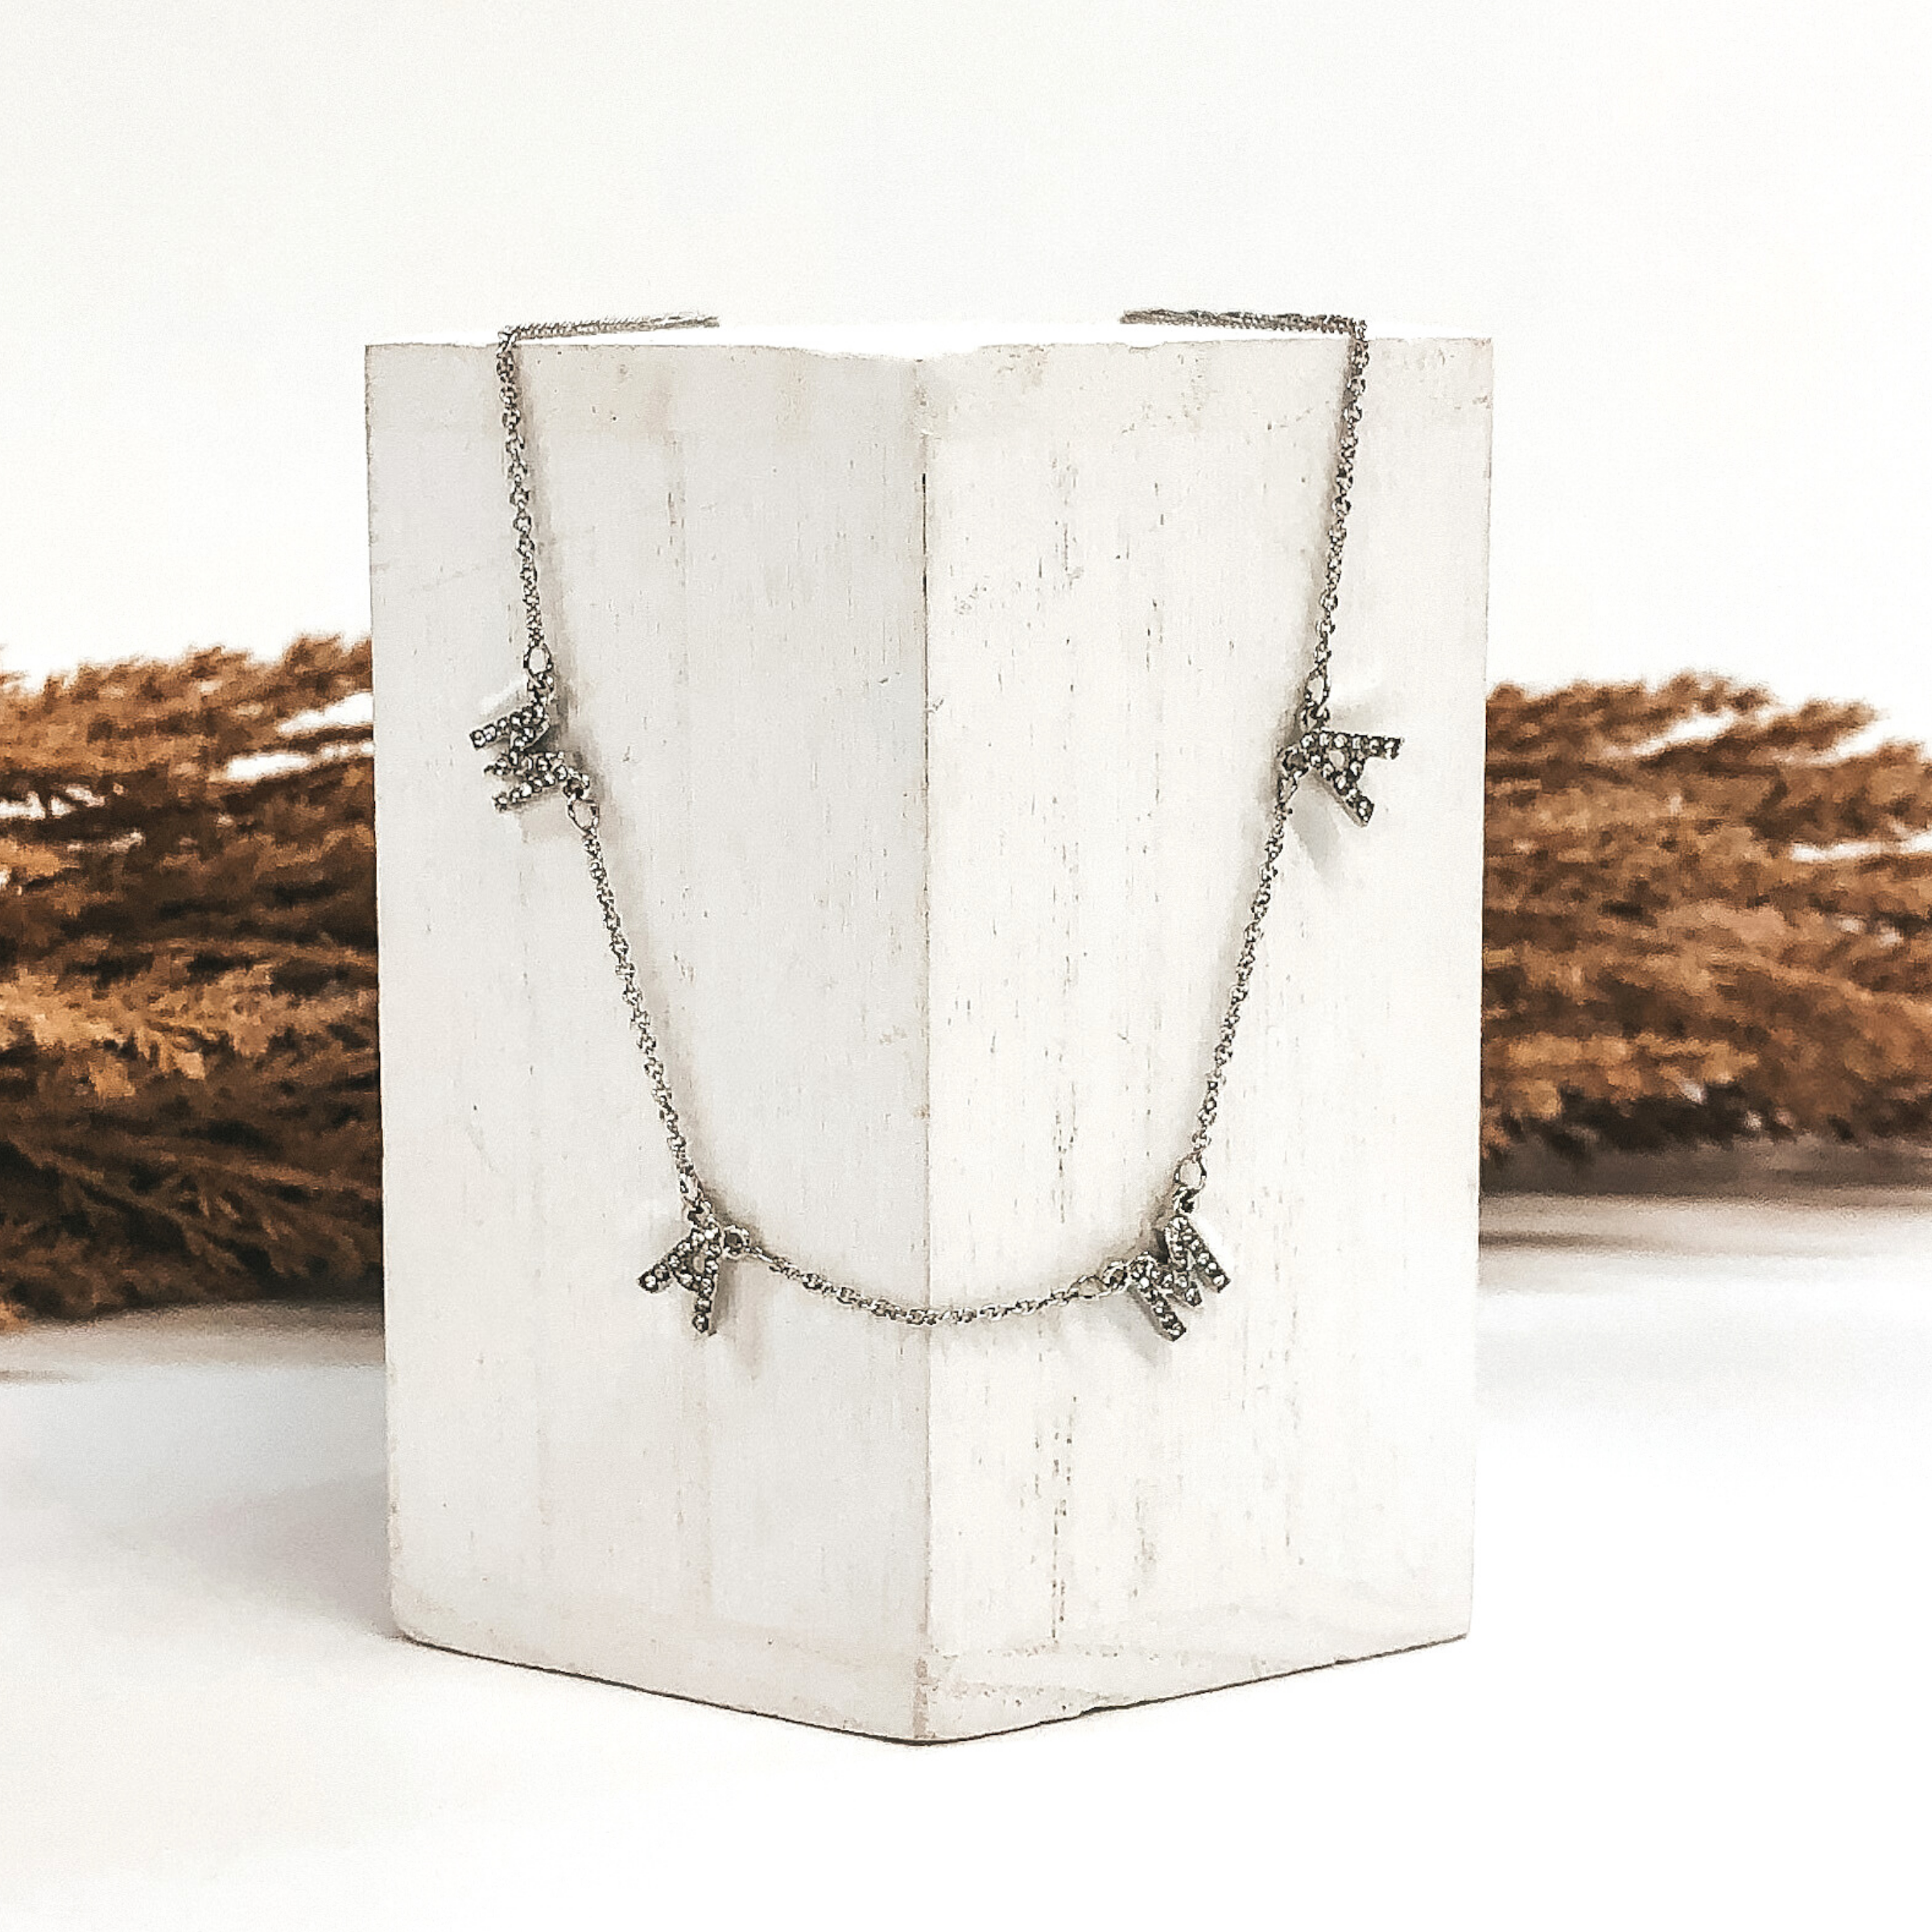 Silver necklace with crystal letter pendants to spell out "MAMA" laid on a white block in front of brown floral. 